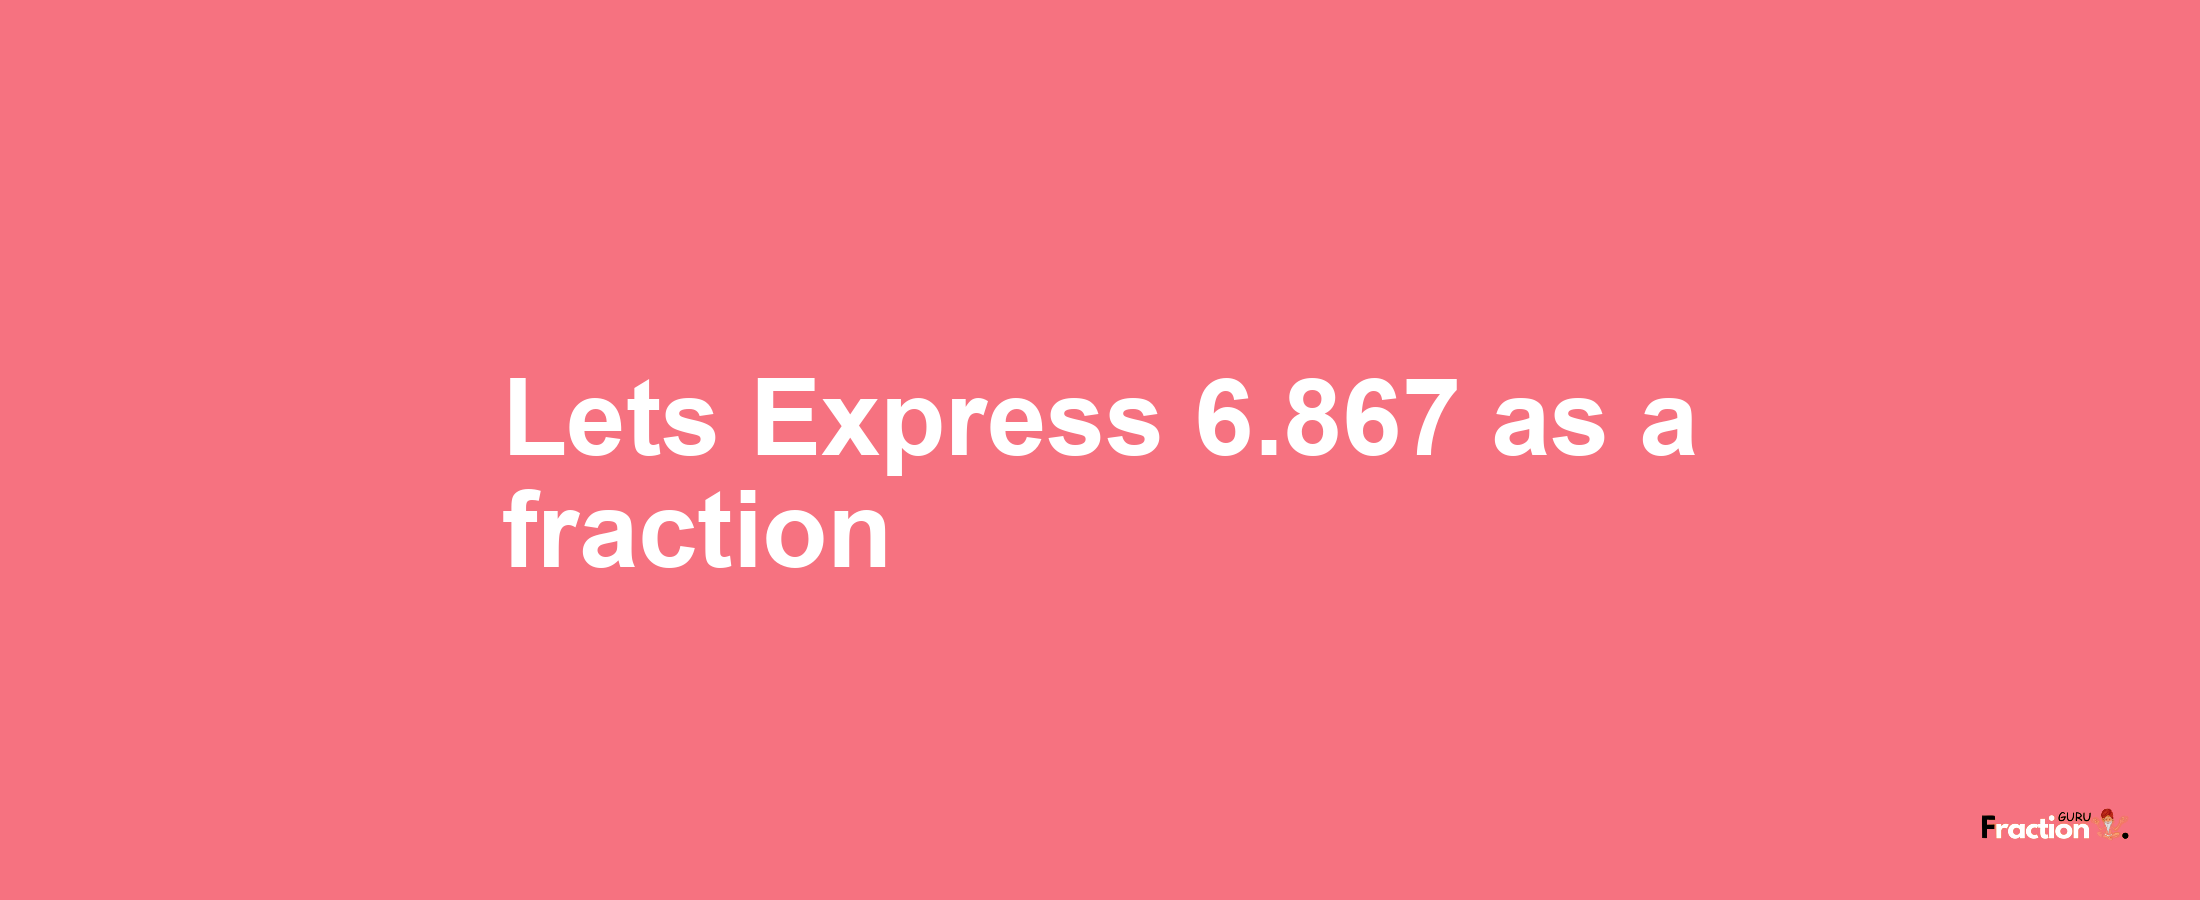 Lets Express 6.867 as afraction